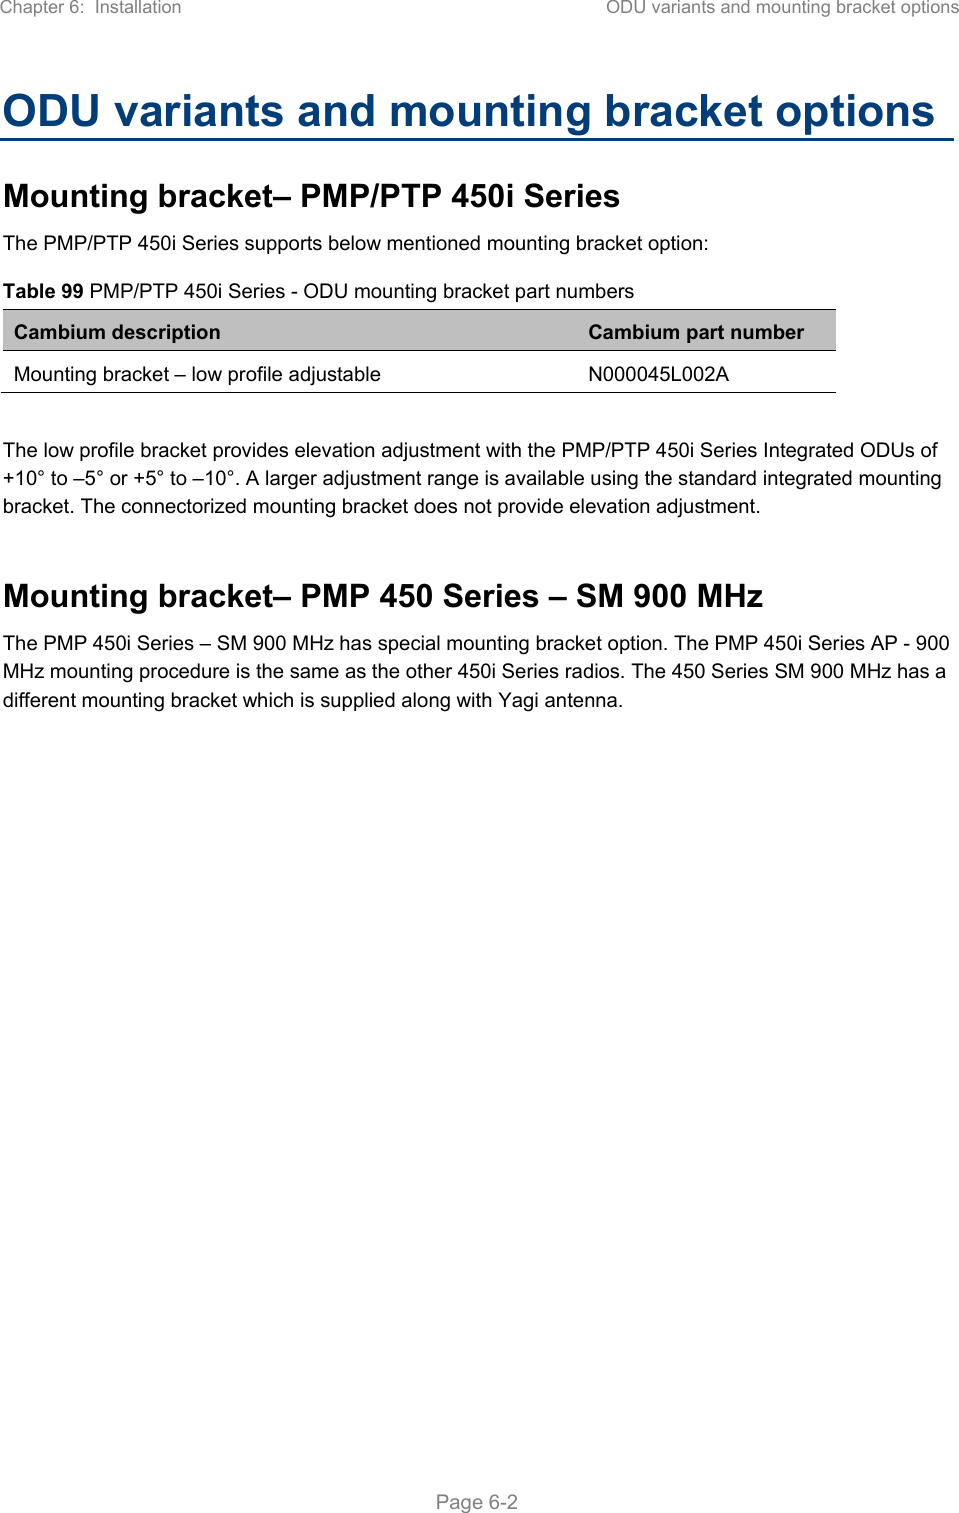 Chapter 6:  Installation  ODU variants and mounting bracket options   Page 6-2 ODU variants and mounting bracket options Mounting bracket– PMP/PTP 450i Series  The PMP/PTP 450i Series supports below mentioned mounting bracket option: Table 99 PMP/PTP 450i Series - ODU mounting bracket part numbers Cambium description  Cambium part number Mounting bracket – low profile adjustable  N000045L002A  The low profile bracket provides elevation adjustment with the PMP/PTP 450i Series Integrated ODUs of +10° to –5° or +5° to –10°. A larger adjustment range is available using the standard integrated mounting bracket. The connectorized mounting bracket does not provide elevation adjustment.  Mounting bracket– PMP 450 Series – SM 900 MHz The PMP 450i Series – SM 900 MHz has special mounting bracket option. The PMP 450i Series AP - 900 MHz mounting procedure is the same as the other 450i Series radios. The 450 Series SM 900 MHz has a different mounting bracket which is supplied along with Yagi antenna.  